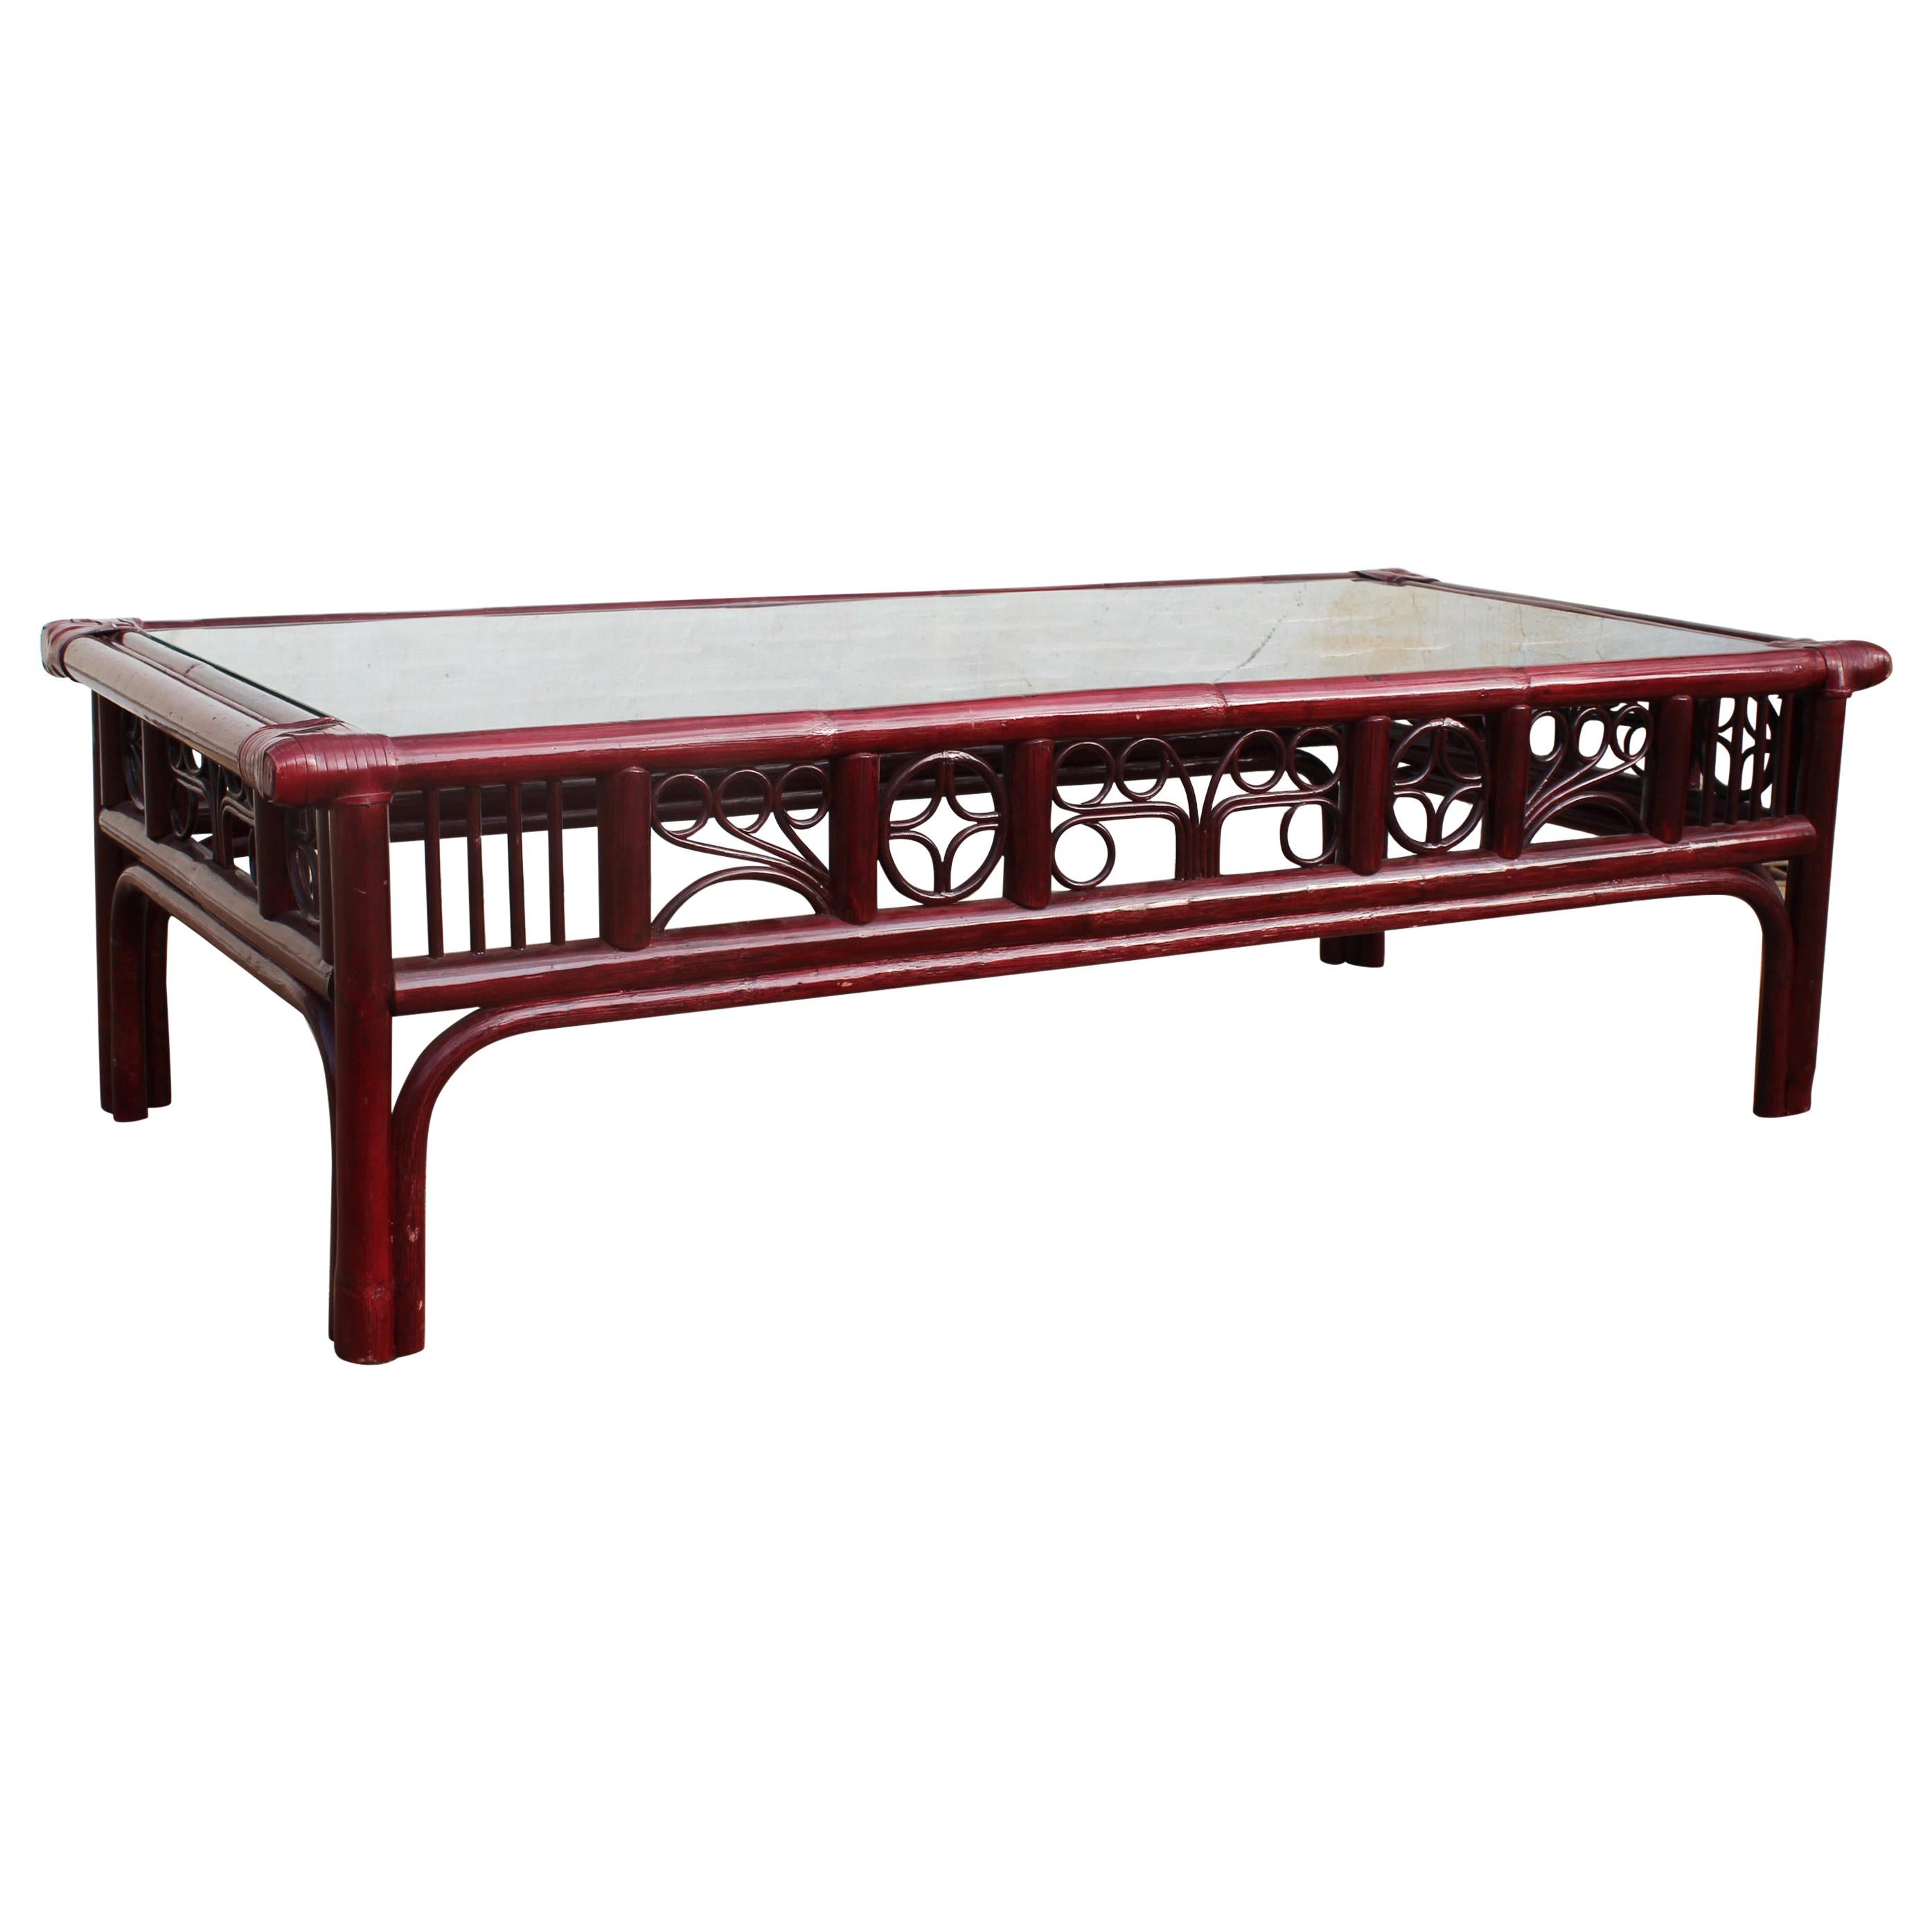 1970s Spanish Oriental Style Red Wooden Coffee Table with Leather Binds